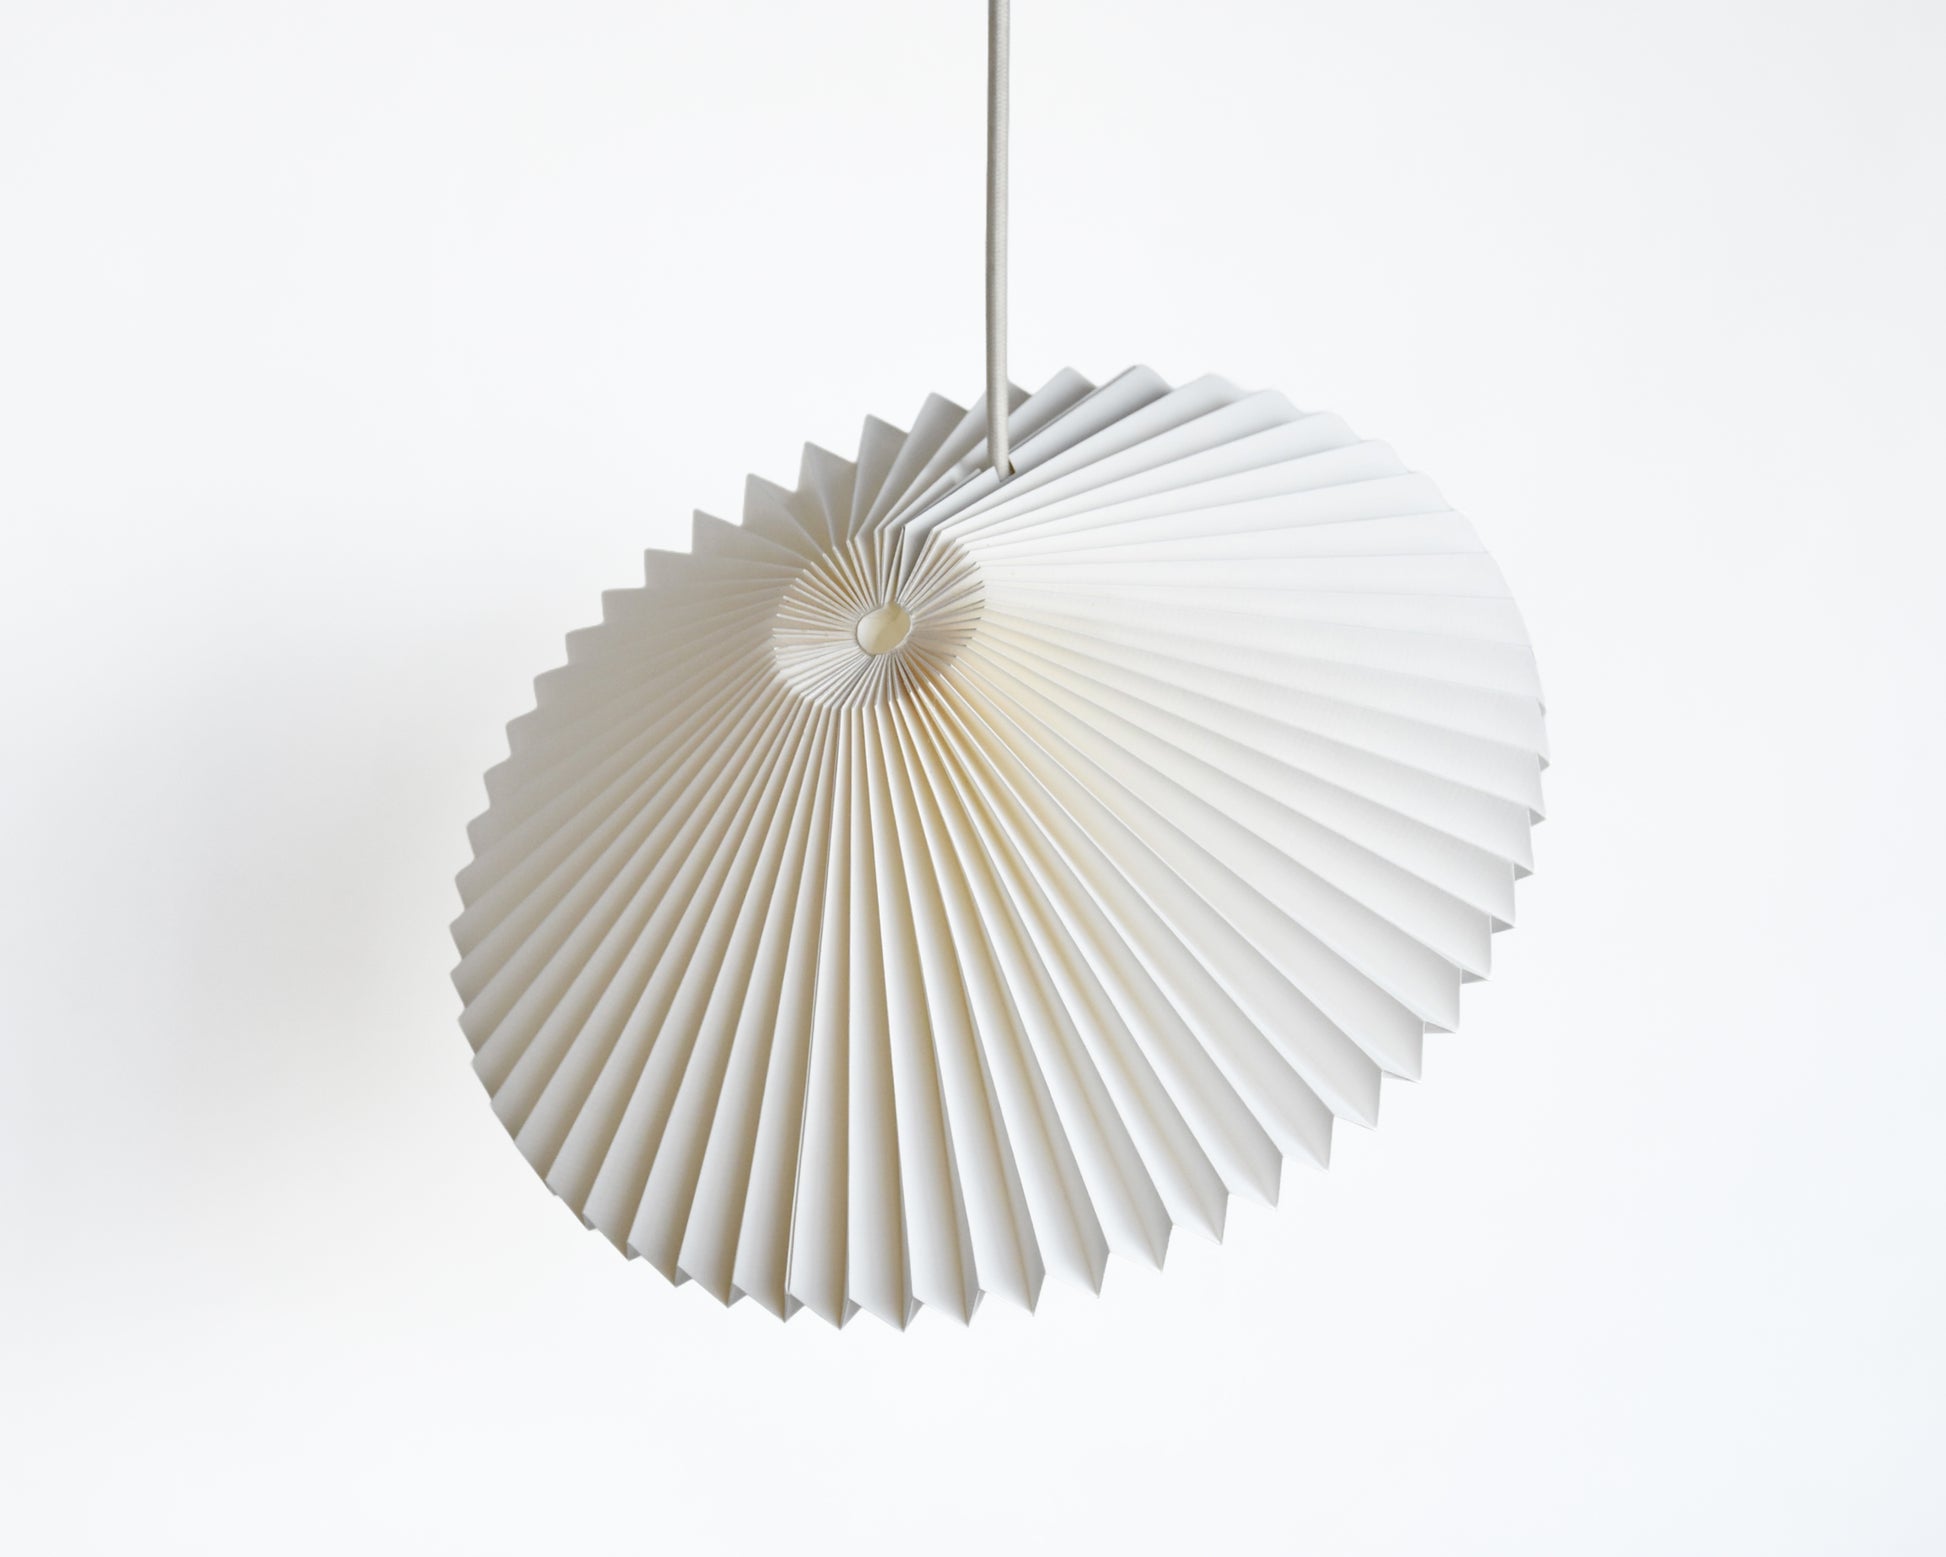 Unique paper folded lamp, adds a touch of style to your home decor. (Buy now)